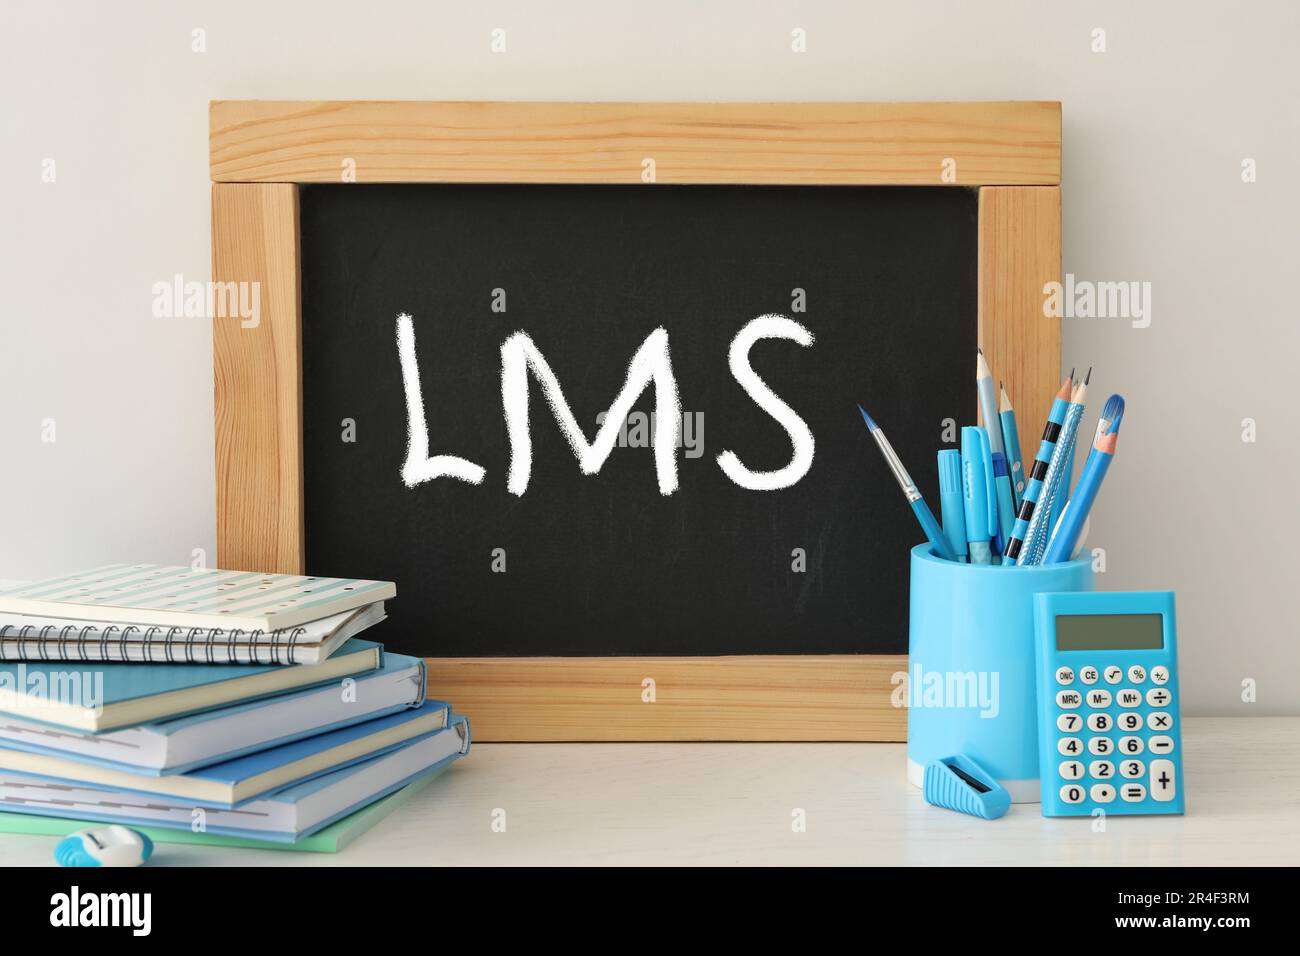 Learning management system. Small chalkboard with abbreviation LMS on light table with stationery Stock Photo